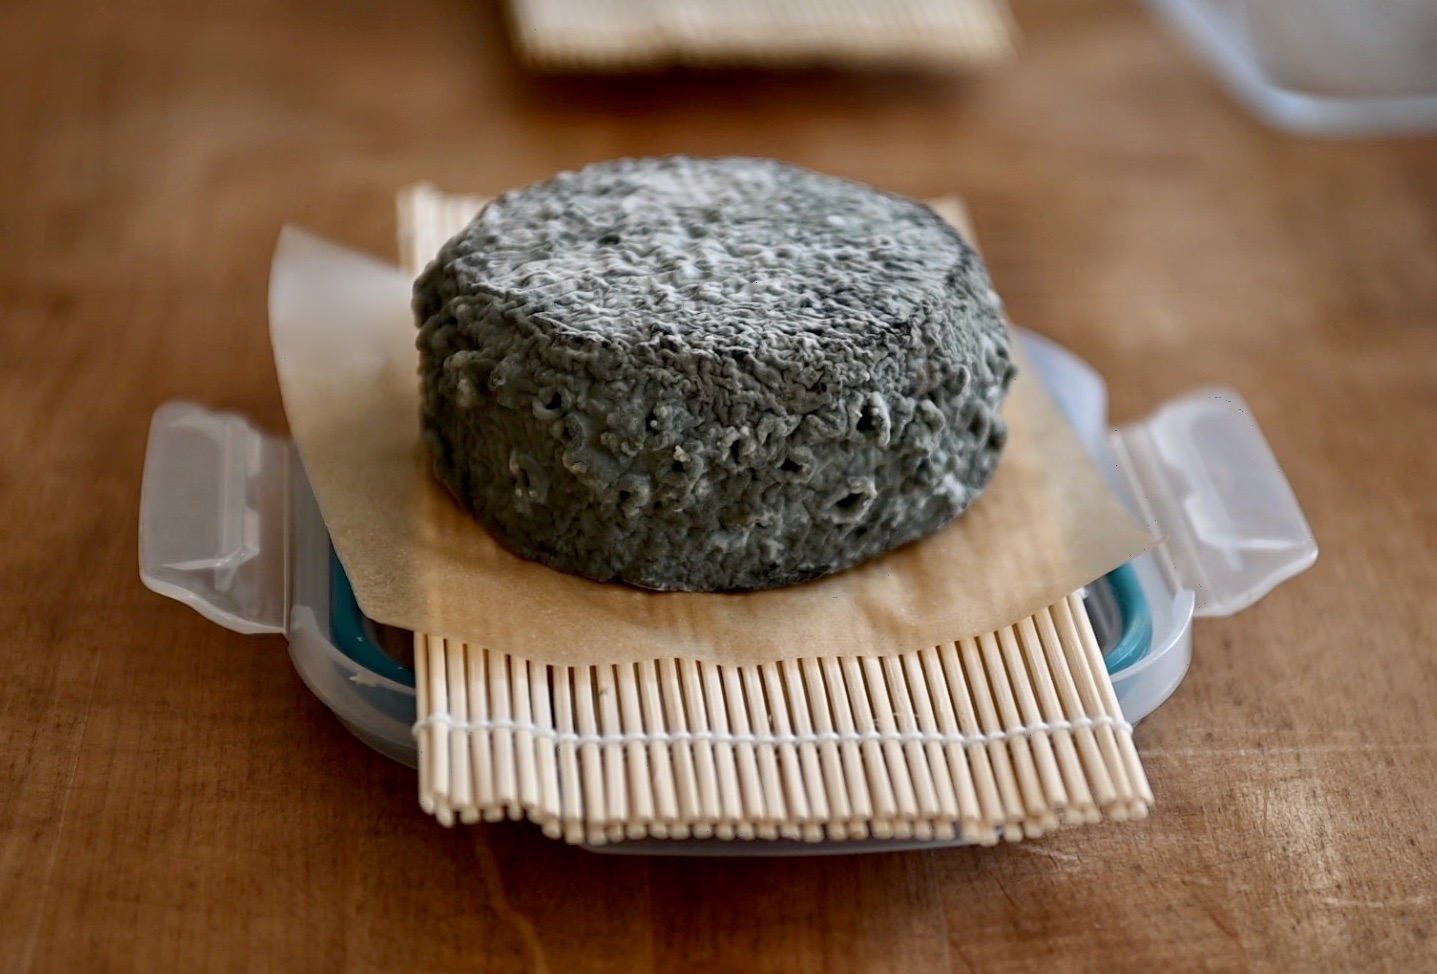 the cheese is covered with blue mold